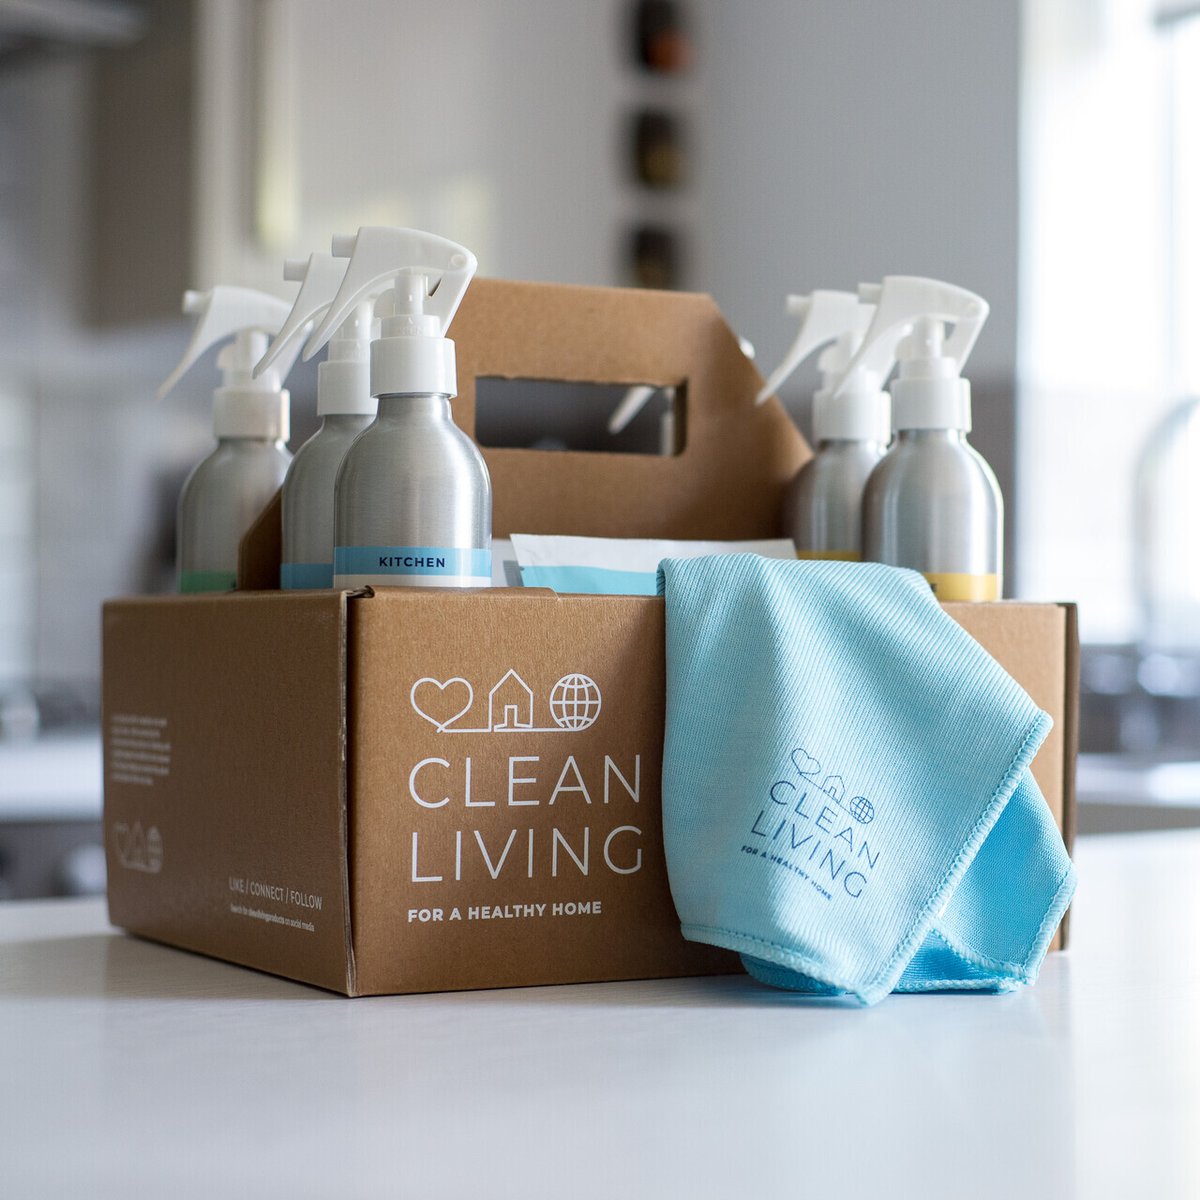 Our kitchen cleaner is a heavy-duty degreaser that effortlessly breaks down oil and fatty residues to leave all of your kitchen surfaces gleaming. ✨ #cleanwithconscience #lowwaste #nontoxicliving